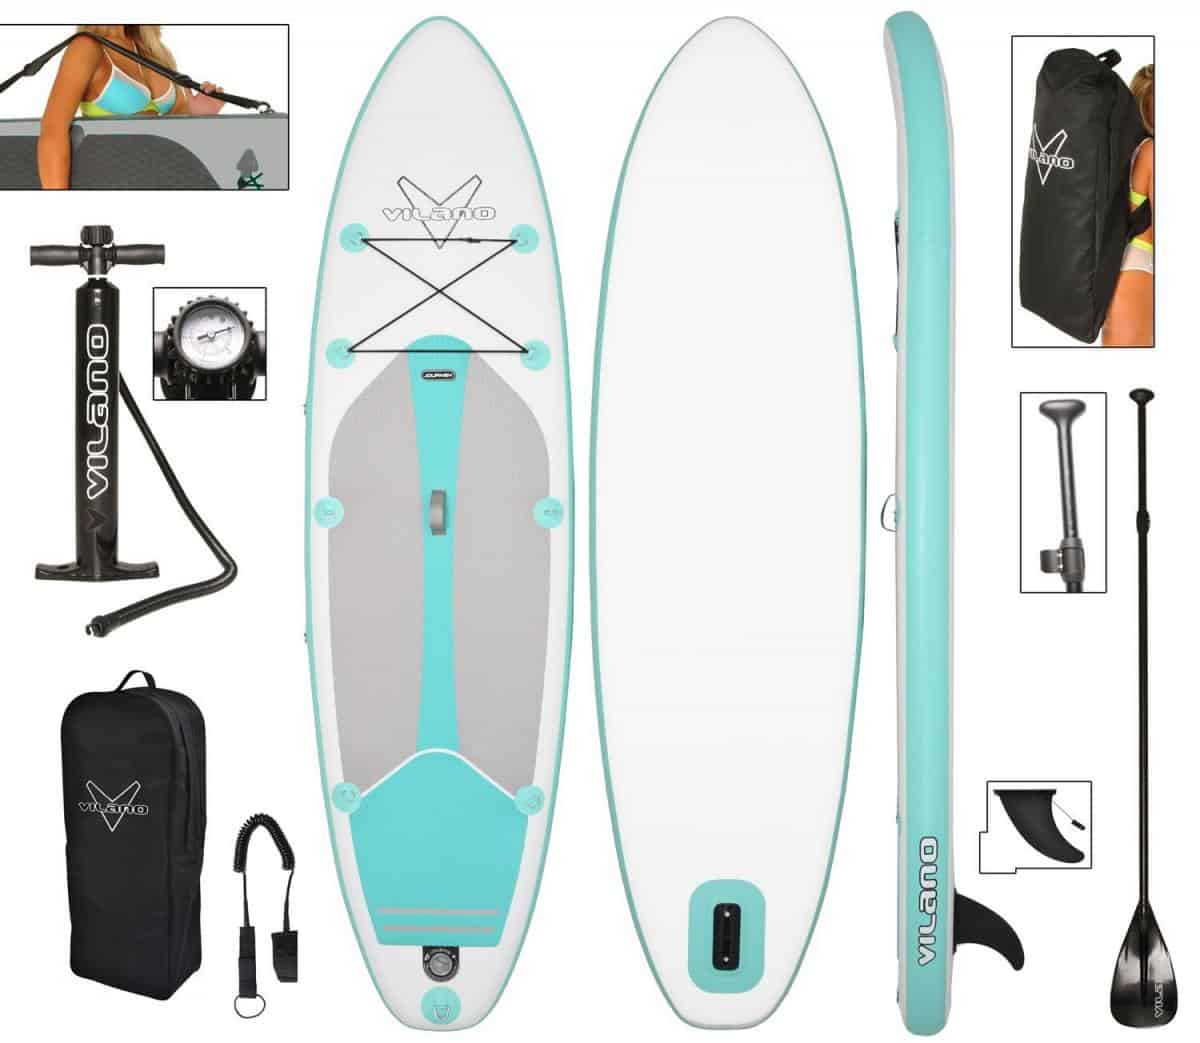 Vilano Journey Inflatable SUP Board Review [Feb 2023] - SupBoardWorld